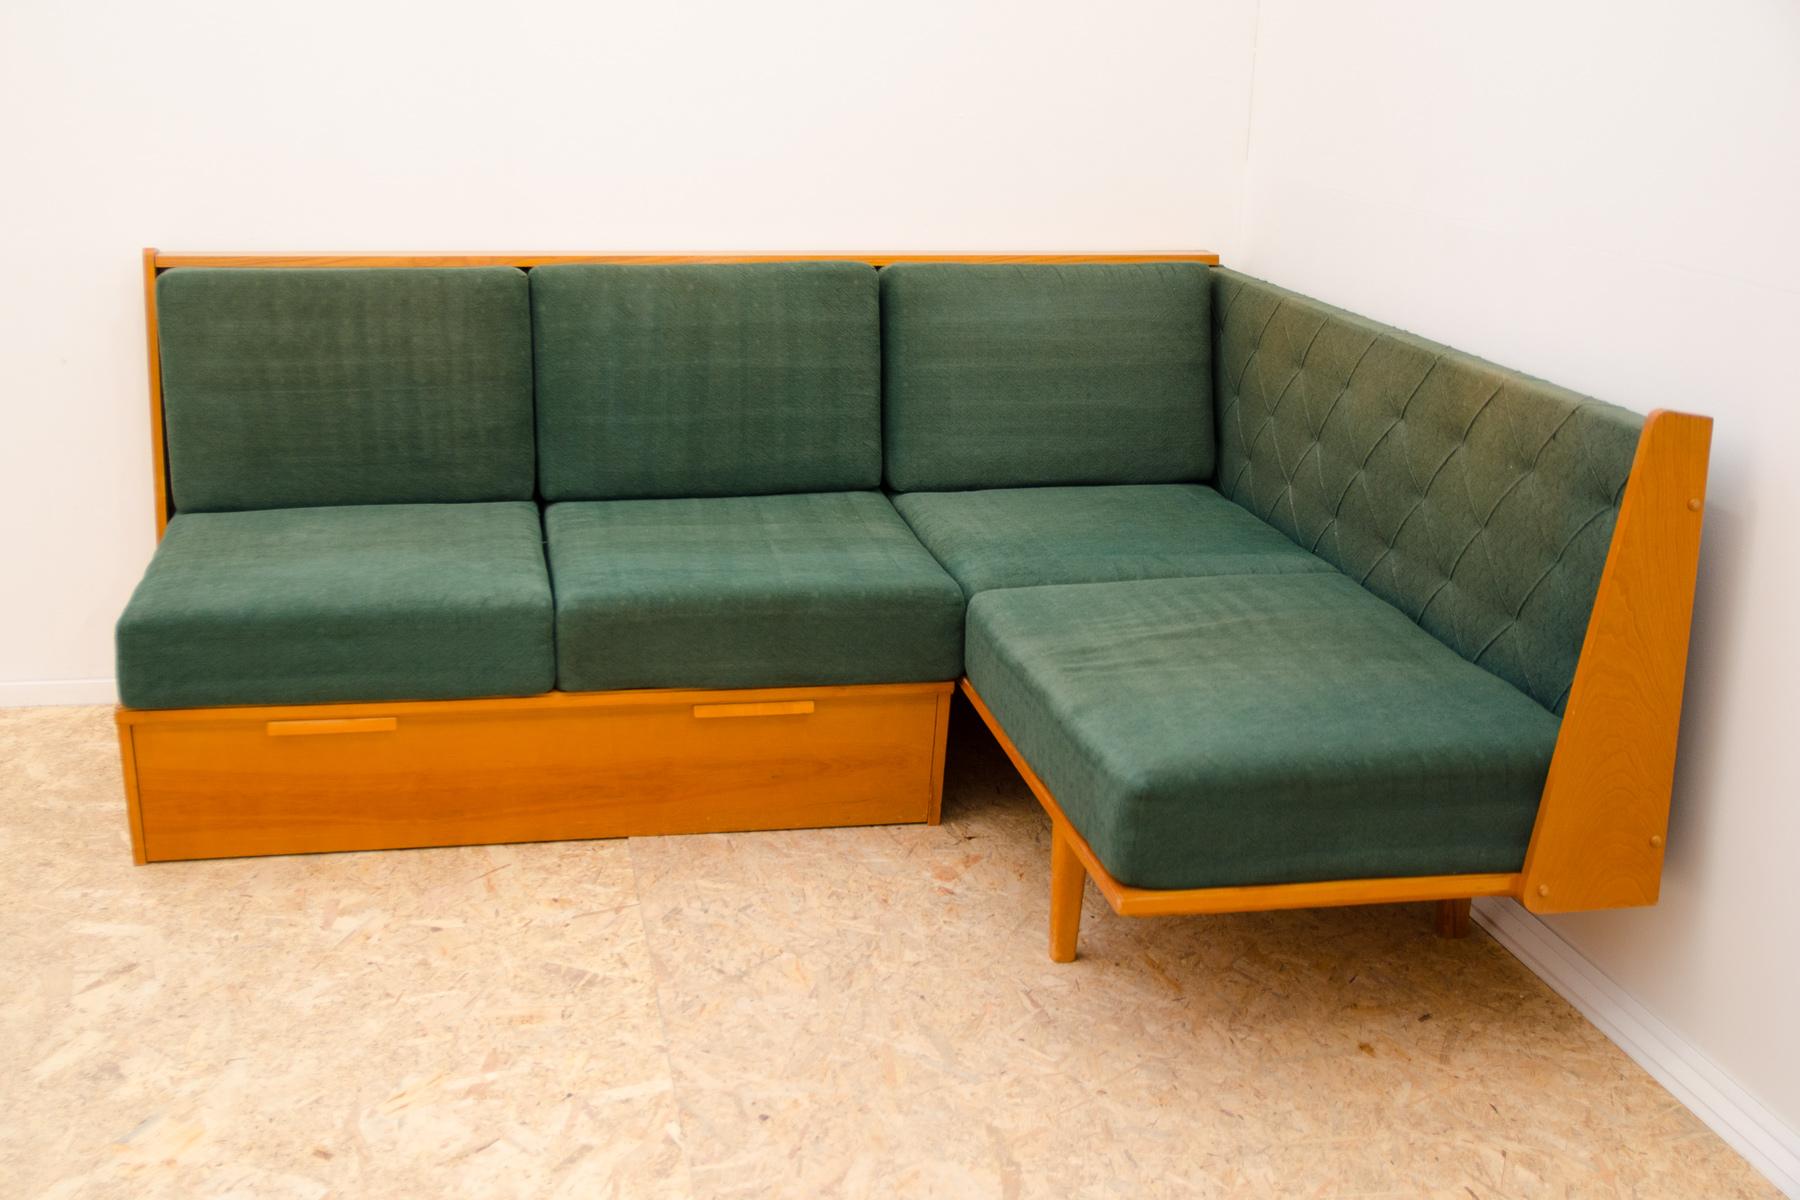 Mid century corner sofa with storage space, made in the former Czechoslovakia in the 1960´s.

This sofa has a veneered beechwood frame and bedding storage. The sofa is in good Vintage condition, showing signs of age and use(faded fabric in a few